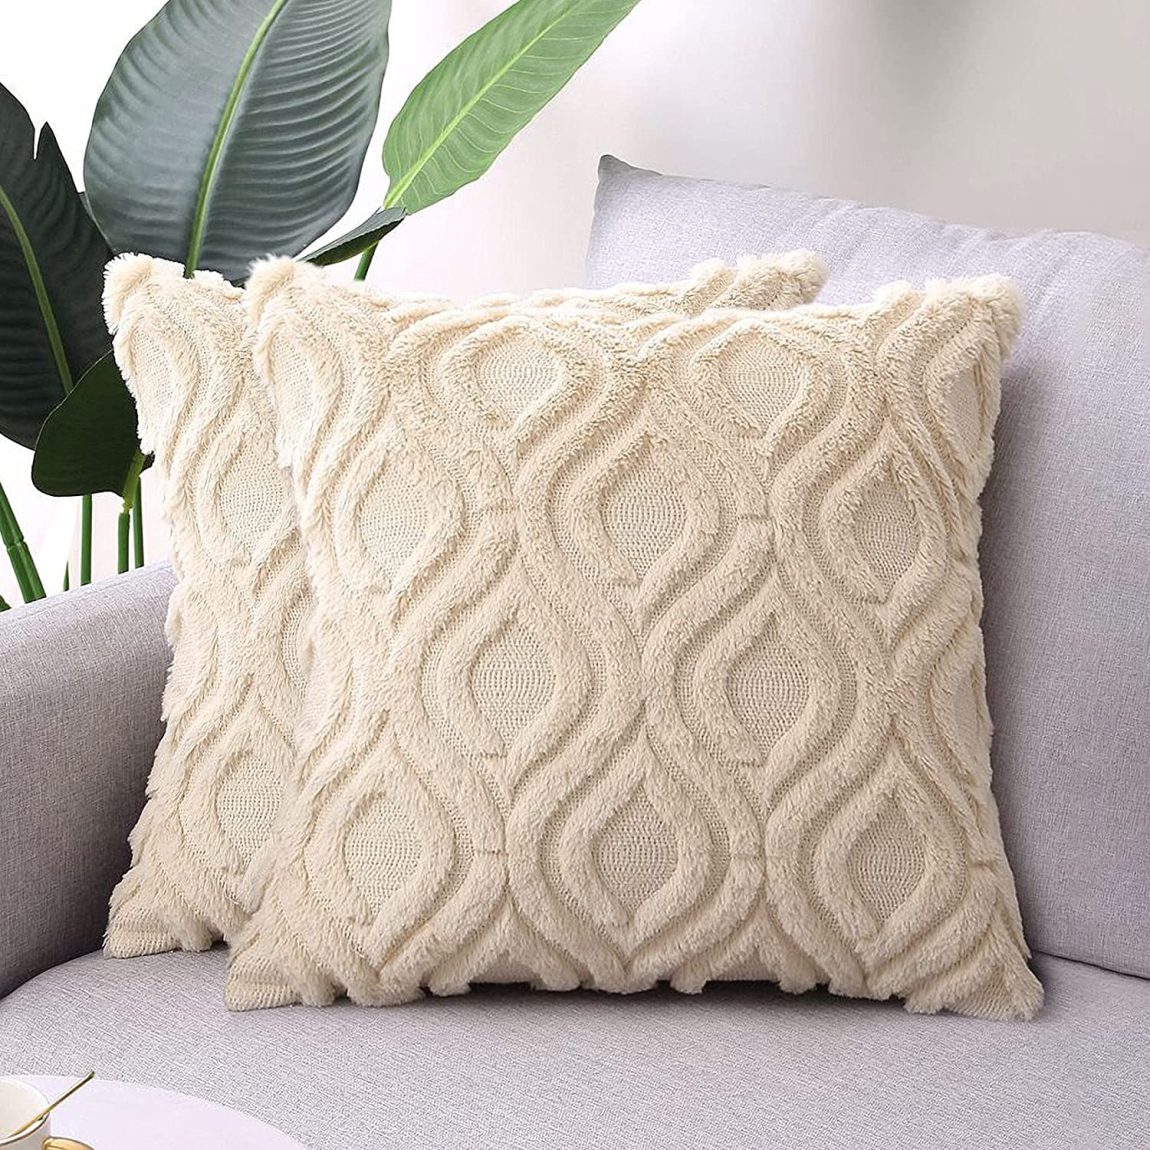 Where Can You Find a Bargain on Boho Throw Pillows?